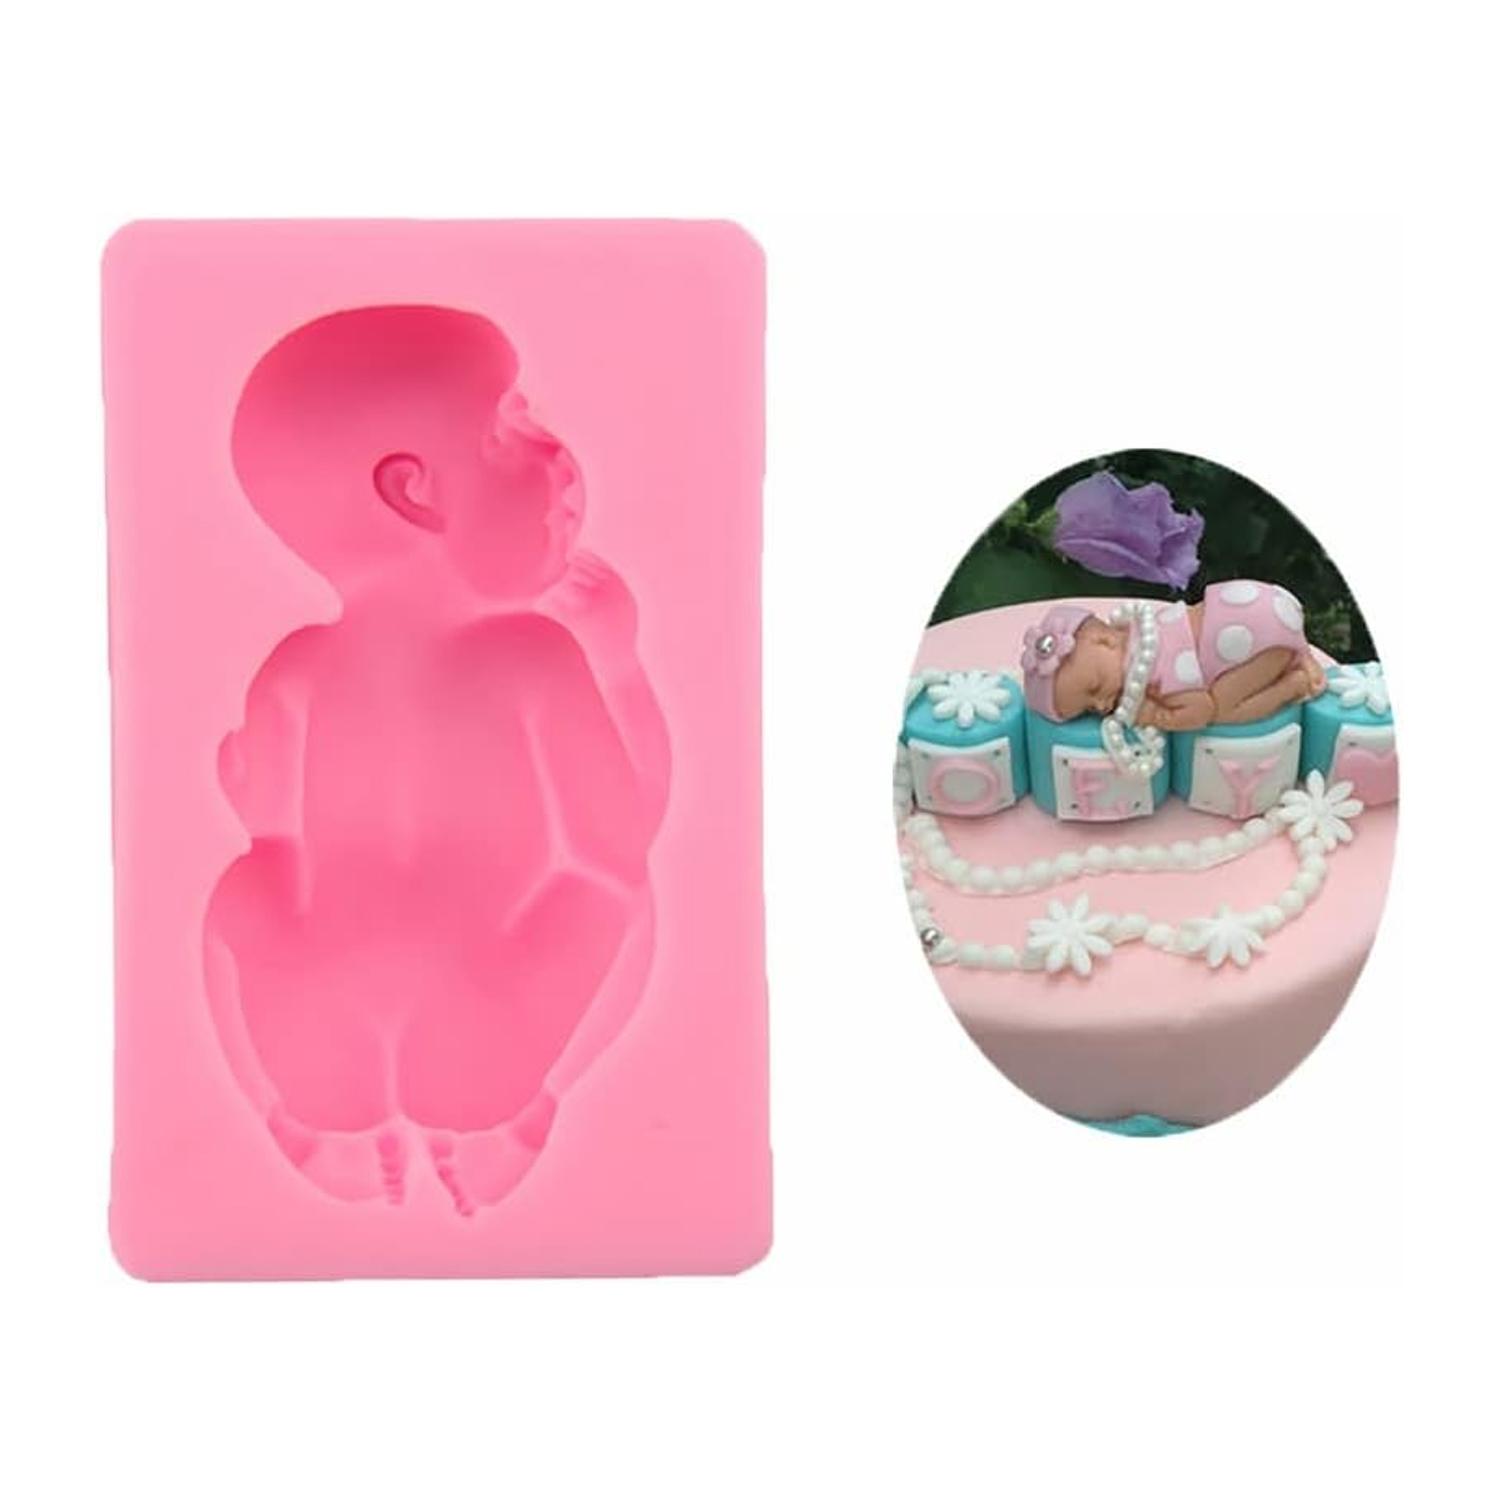 SFGM0050 GIANT BABY CAKE DECORATING SILICON MOULD 4.2''X 2.6'' X1.2''